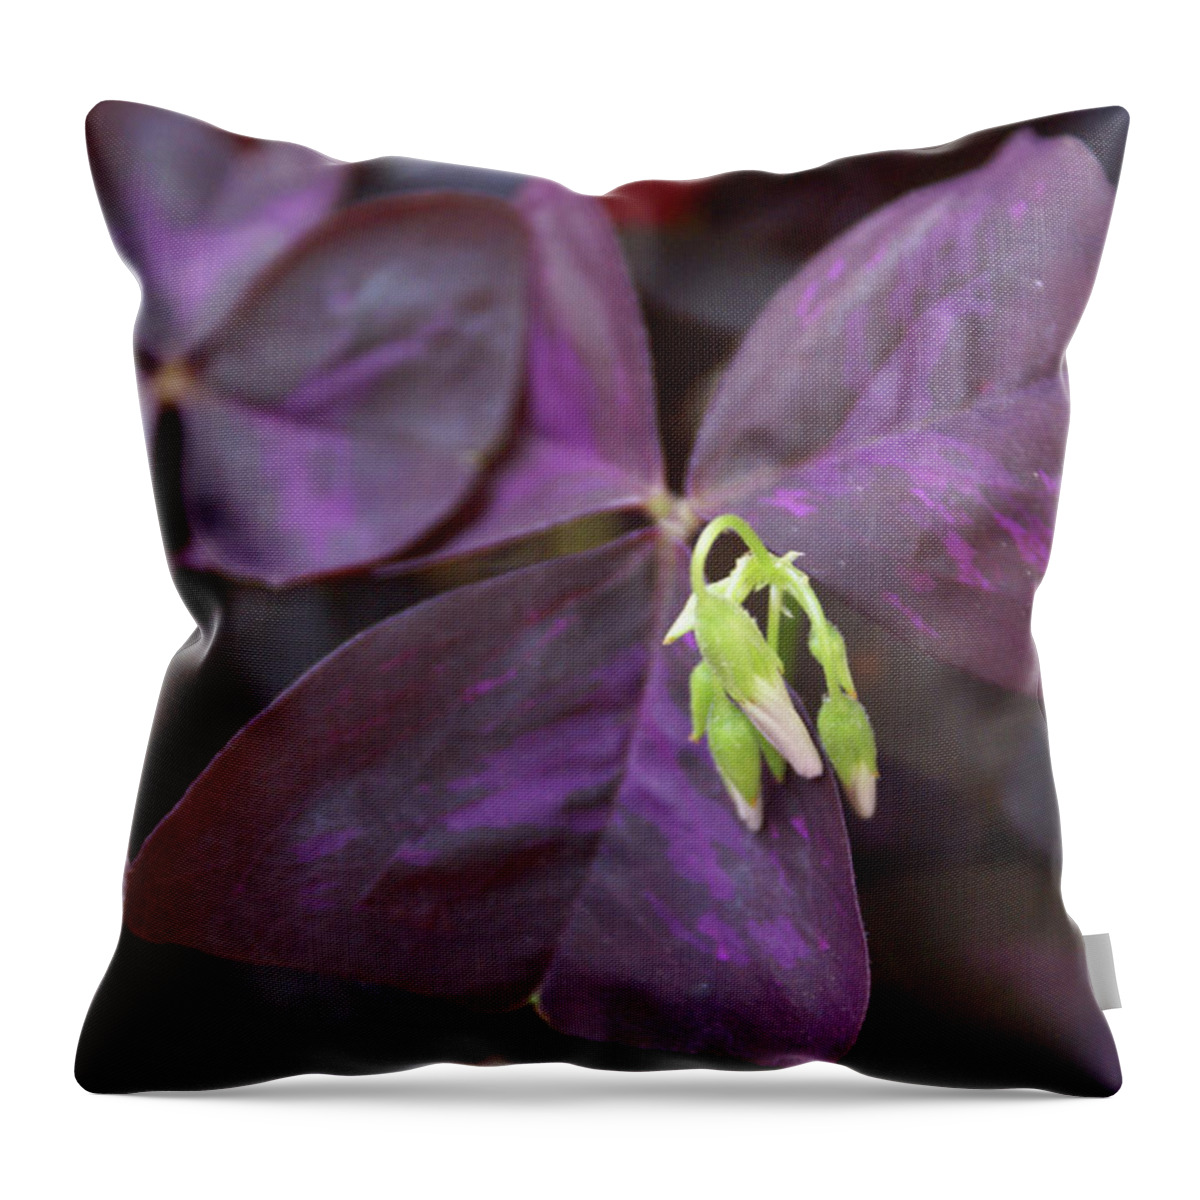  Throw Pillow featuring the photograph Purple Shamrock Buds by Heather E Harman